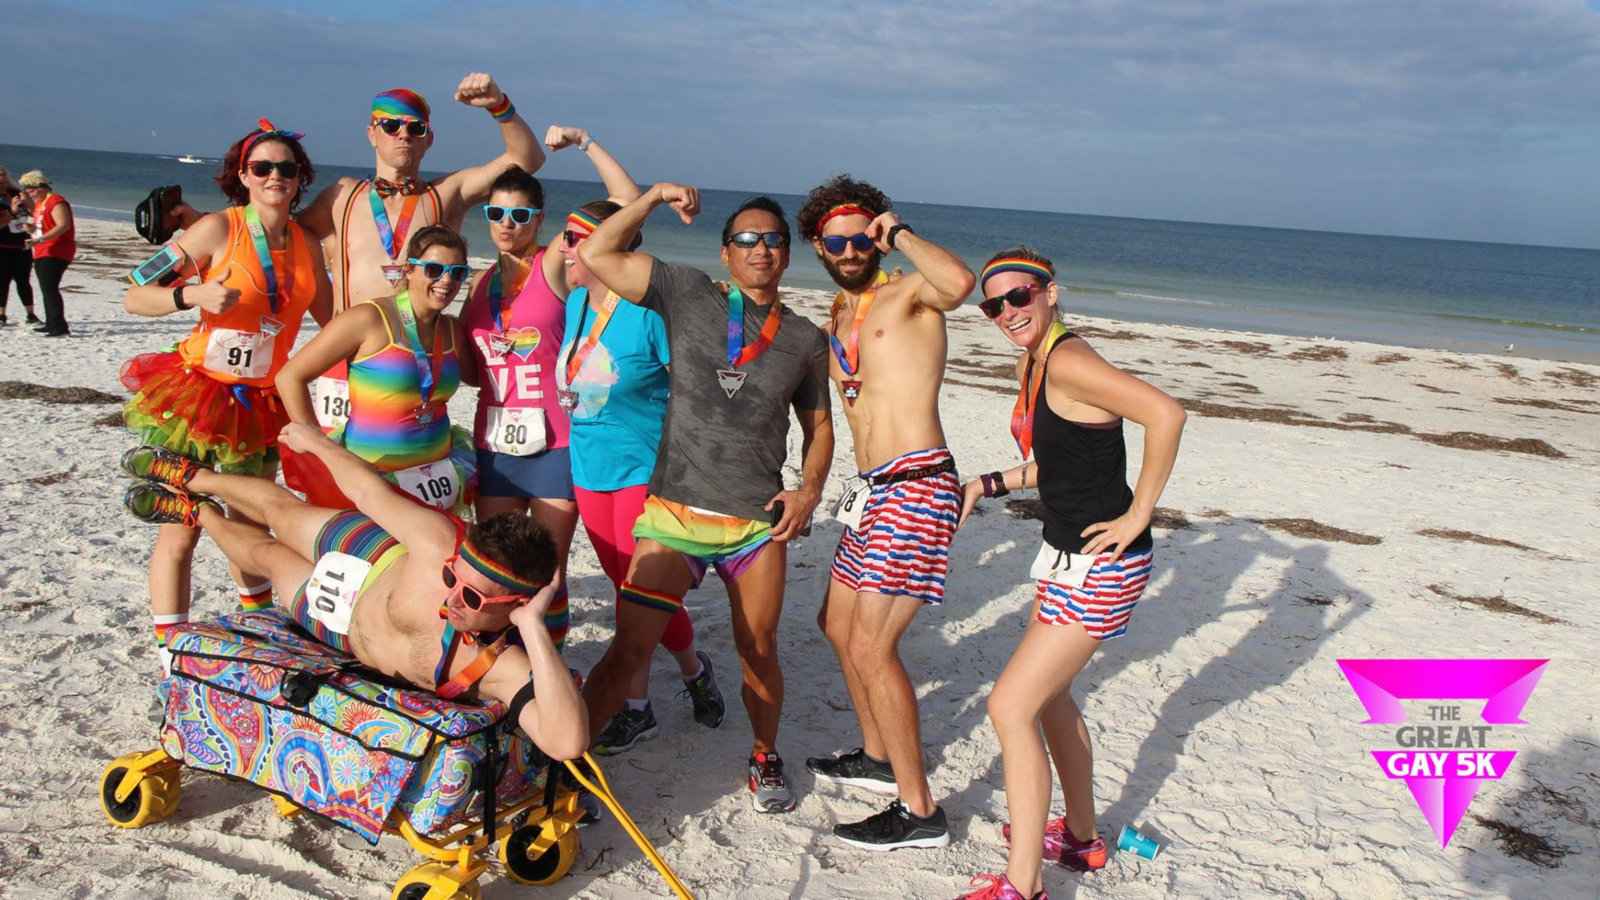 You can be super gay and run a 5K in St Pete with the Great Gay 5K!